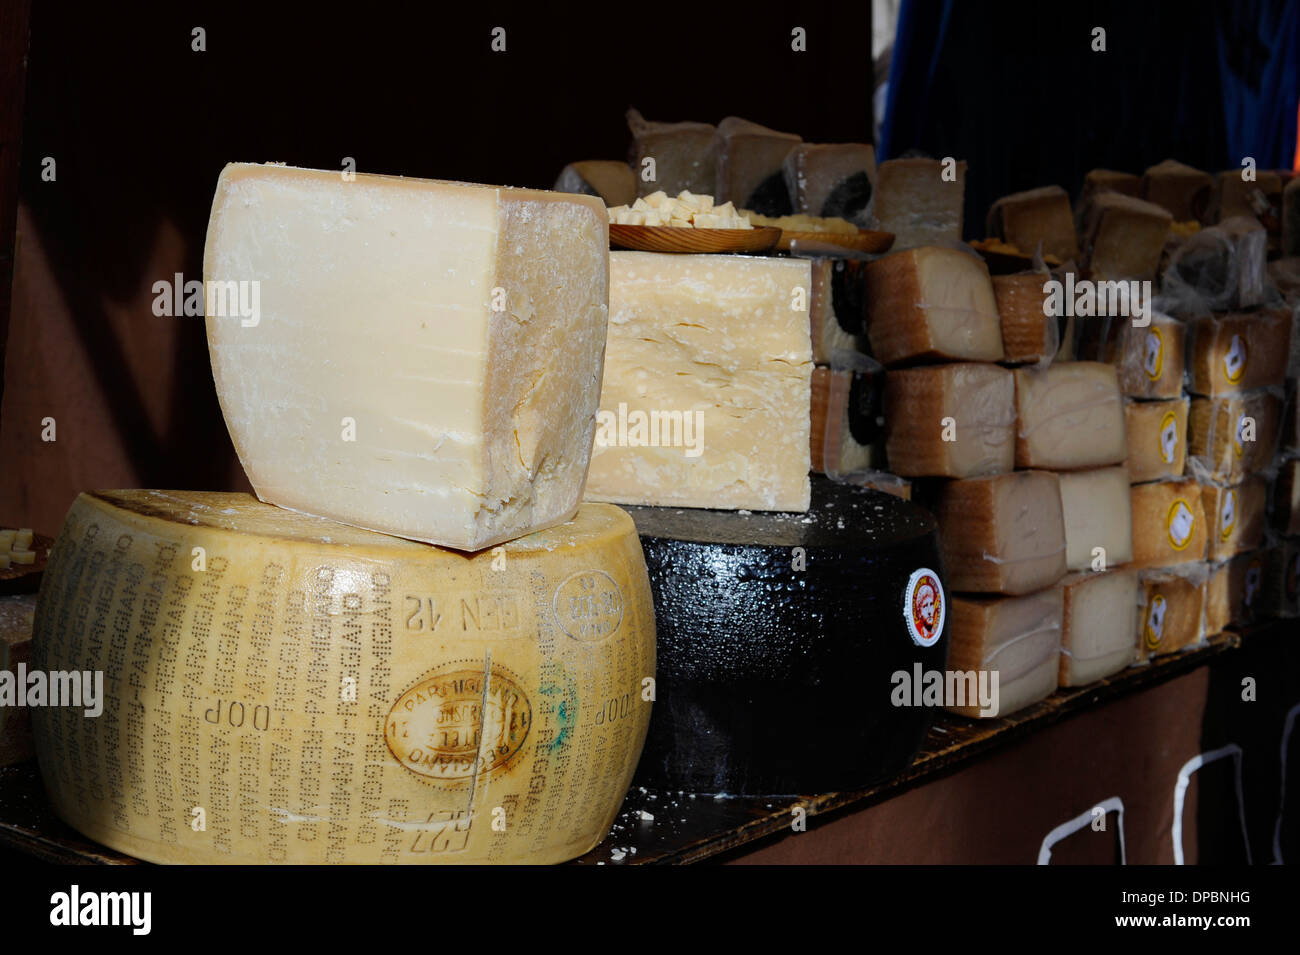 Parmesan and other hard cheeses on display in the annual All Saints Market in Cocentaina, Alicante province, Spain Stock Photo